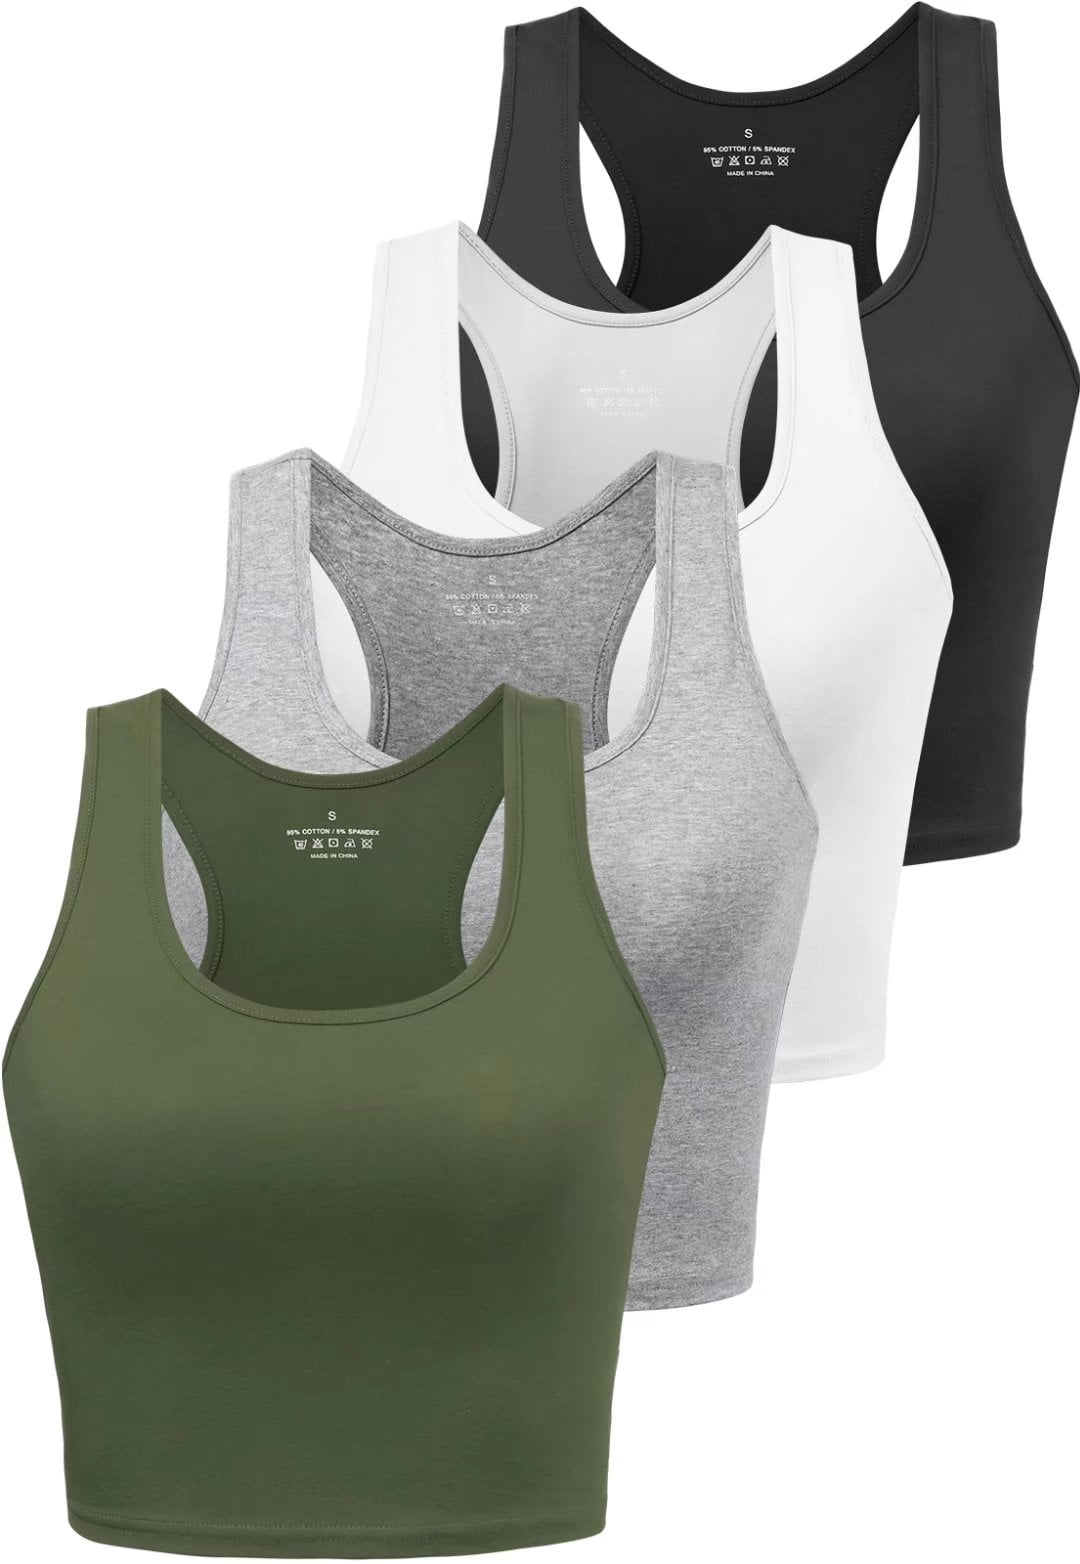 Joviren Cotton Workout Crop Top for Women Racerback Yoga Tank Tops Athletic  Sports Shirts Exercise Undershirts 4 Pack Black White Grey Olive XL